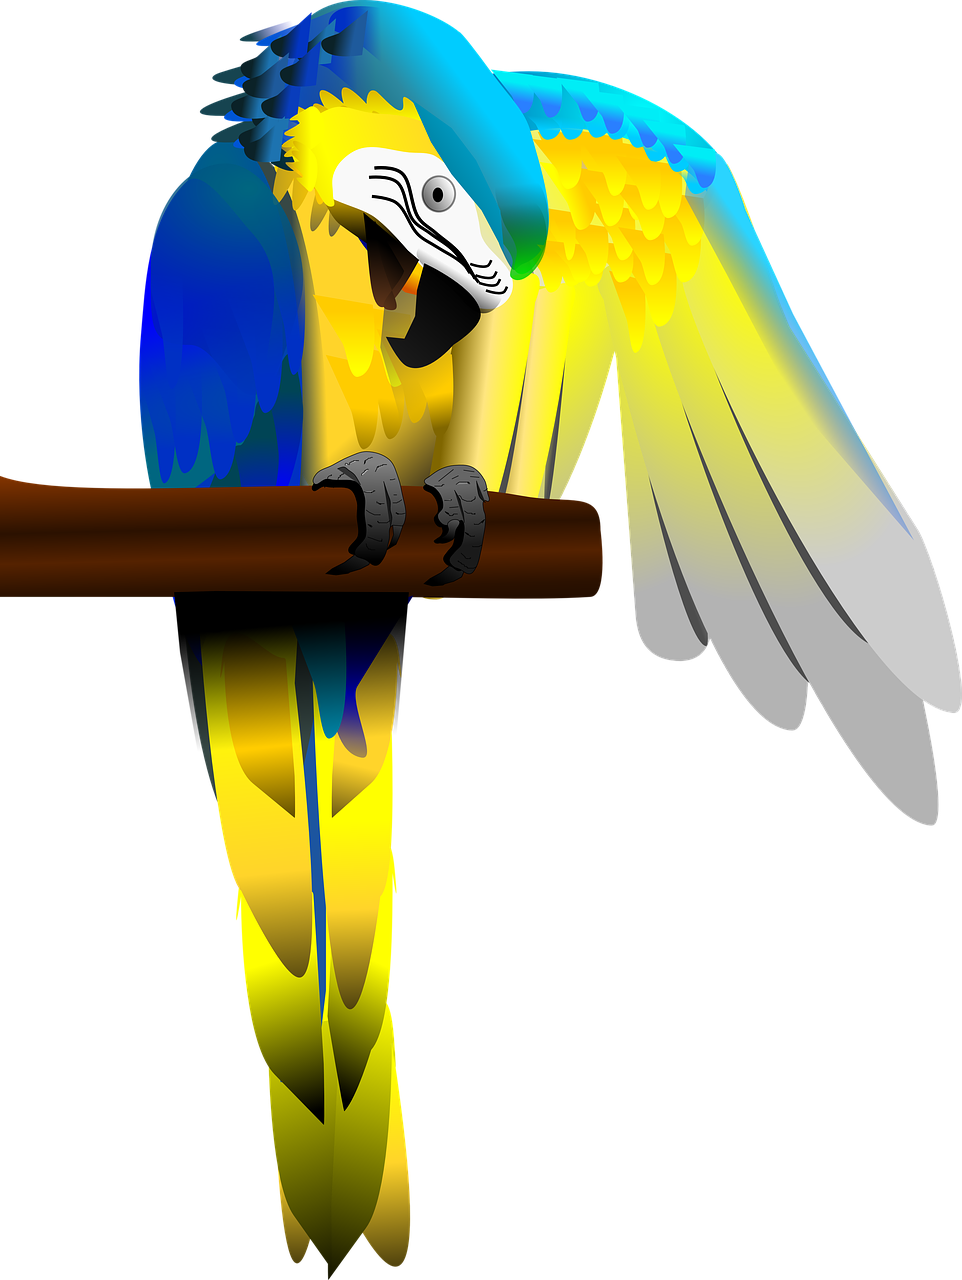 blue and gold macaw parrot macaw free photo